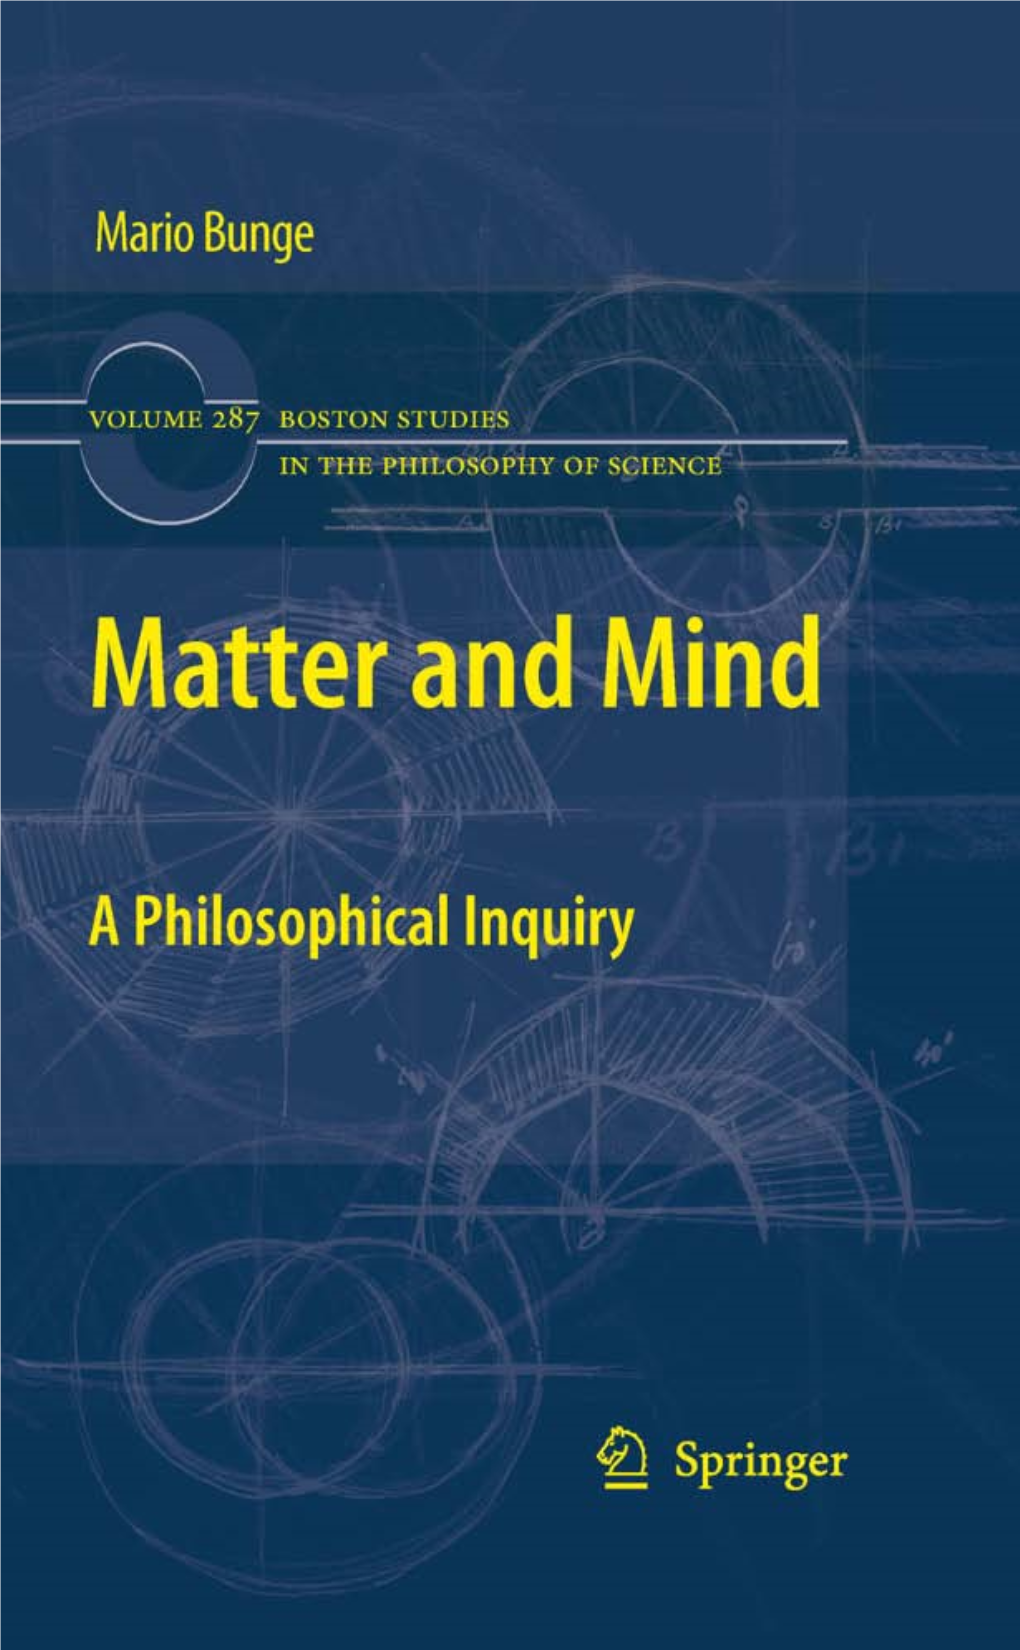 Matter and Mind: a Philosophical Inquiry